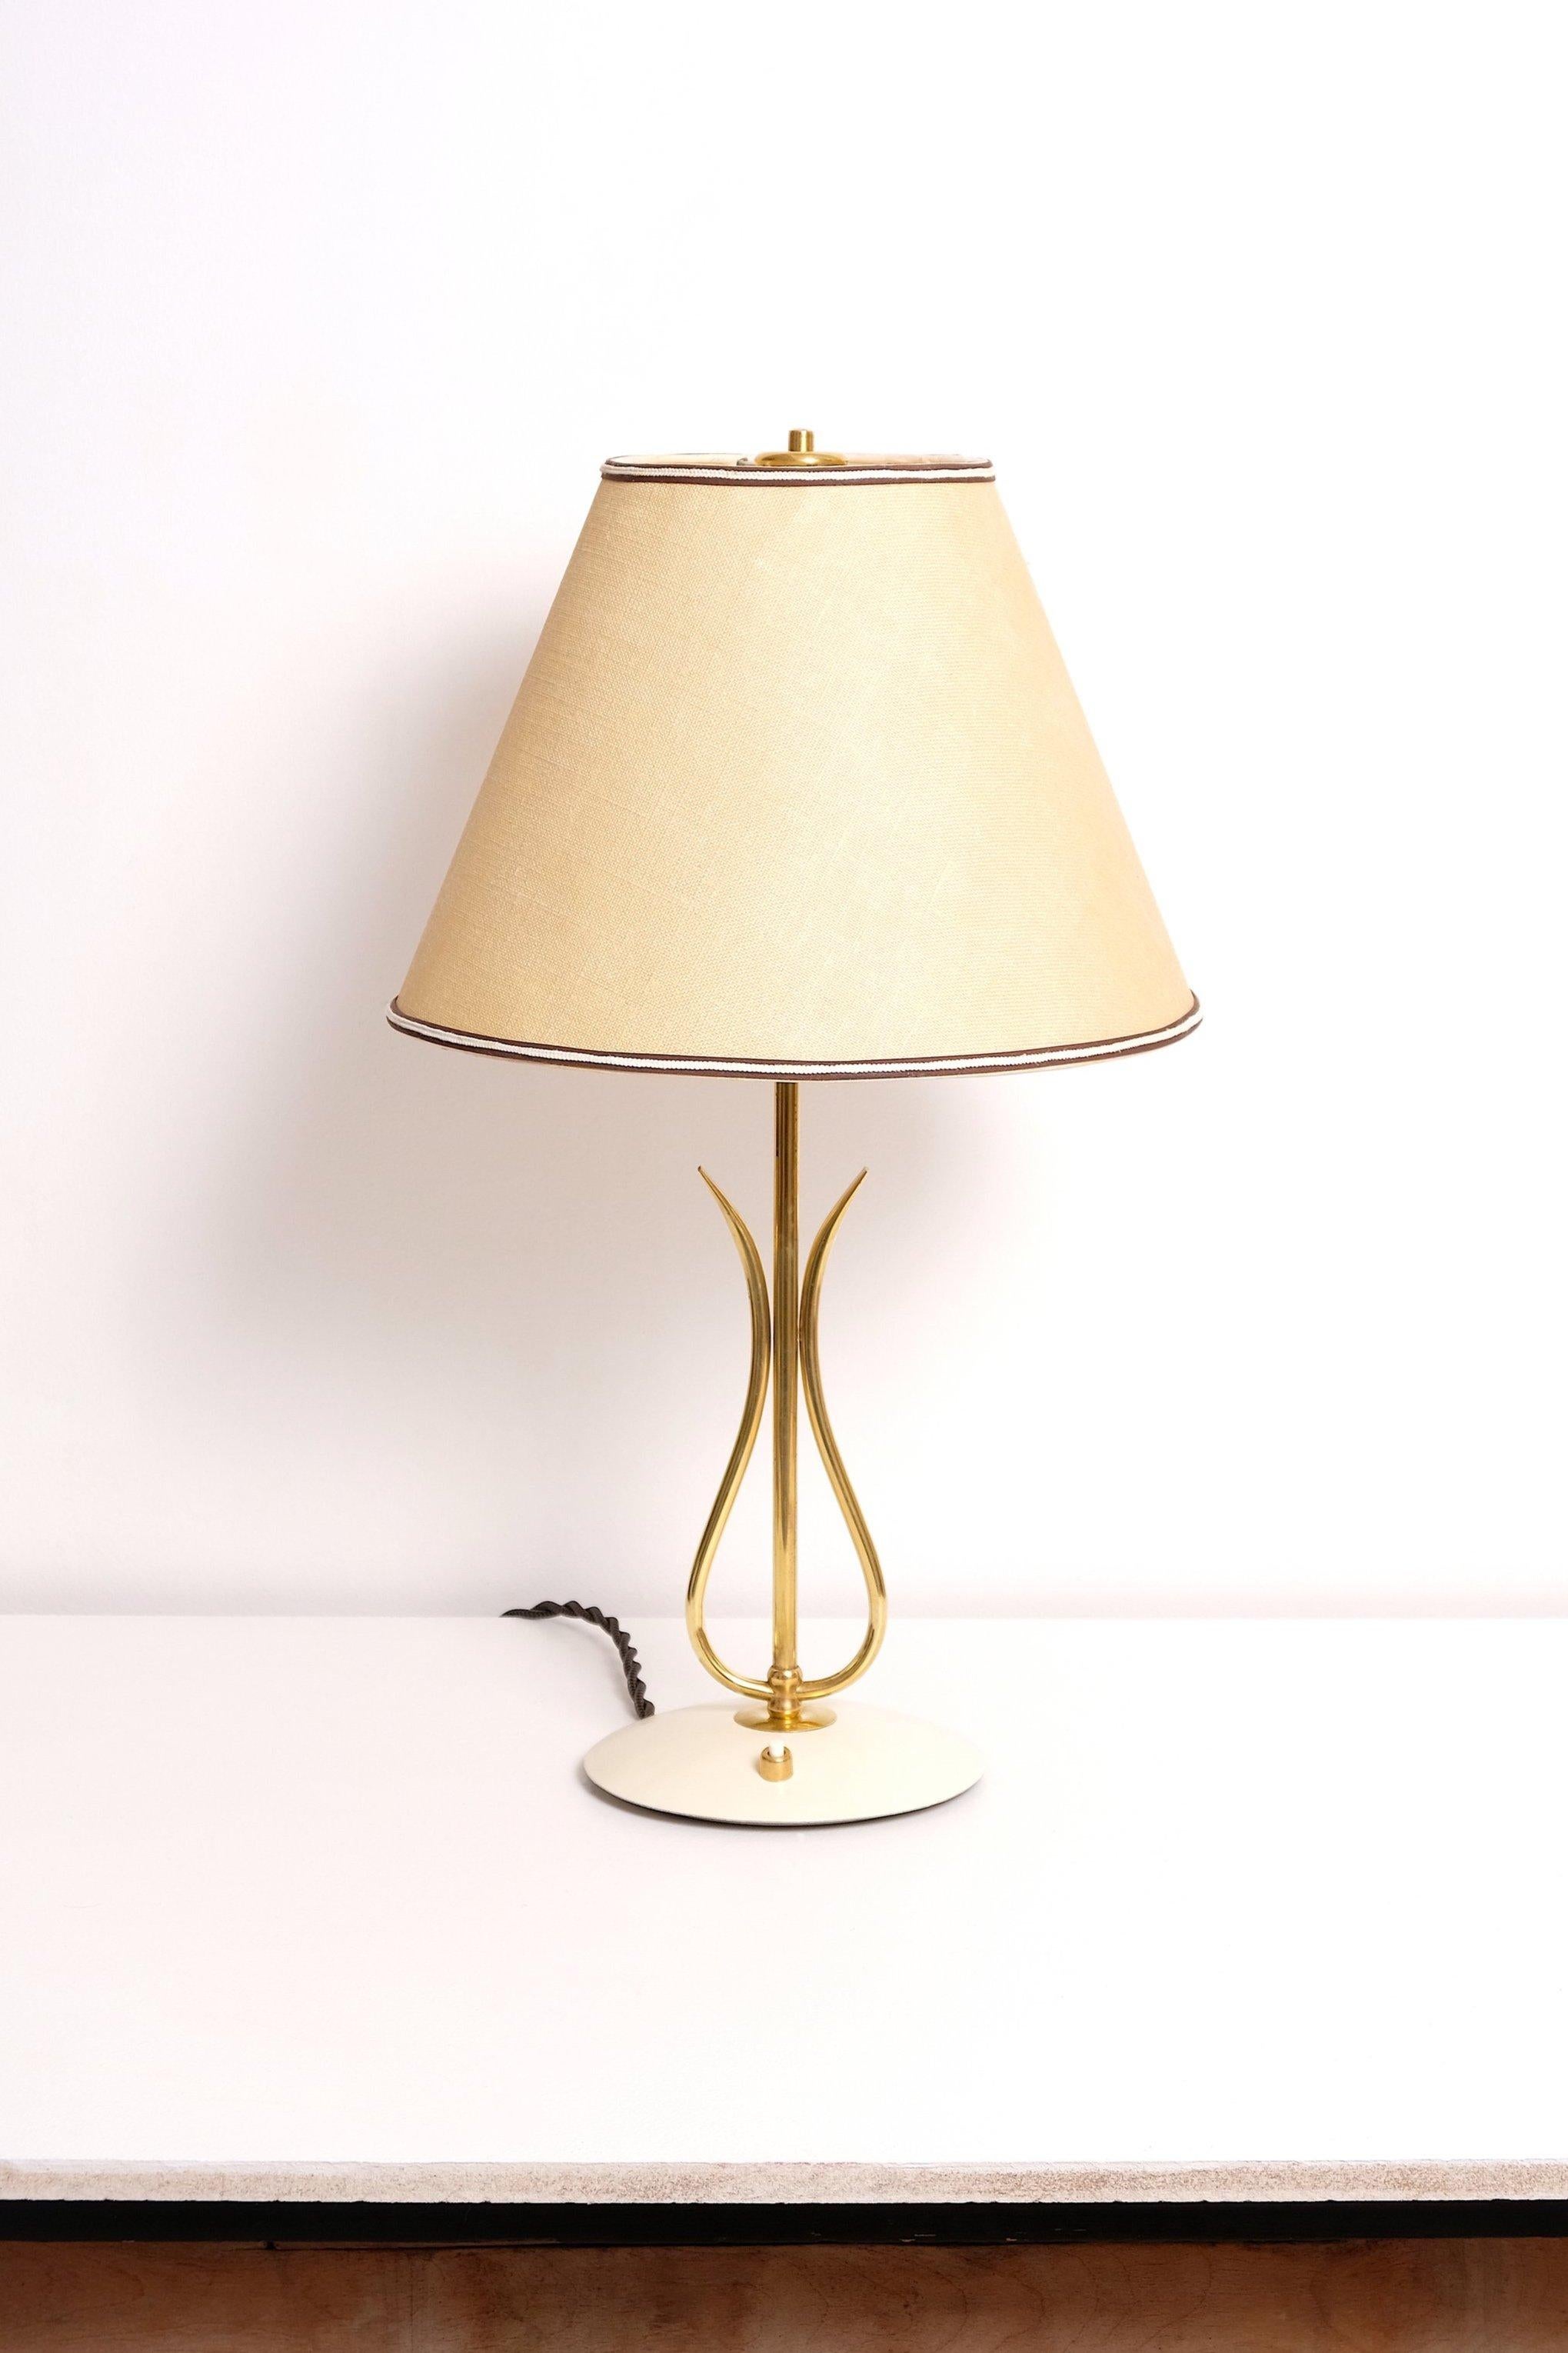 Table lamp made in German. Polished brass stem and foot, paper backed cloth shade. 40-60 watts E-26 Edison medium base incandescent bulb recommended or higher if LED/CFL.

Rewired with new E-26 medium base socket and rewired with 18/2 plastic cord,